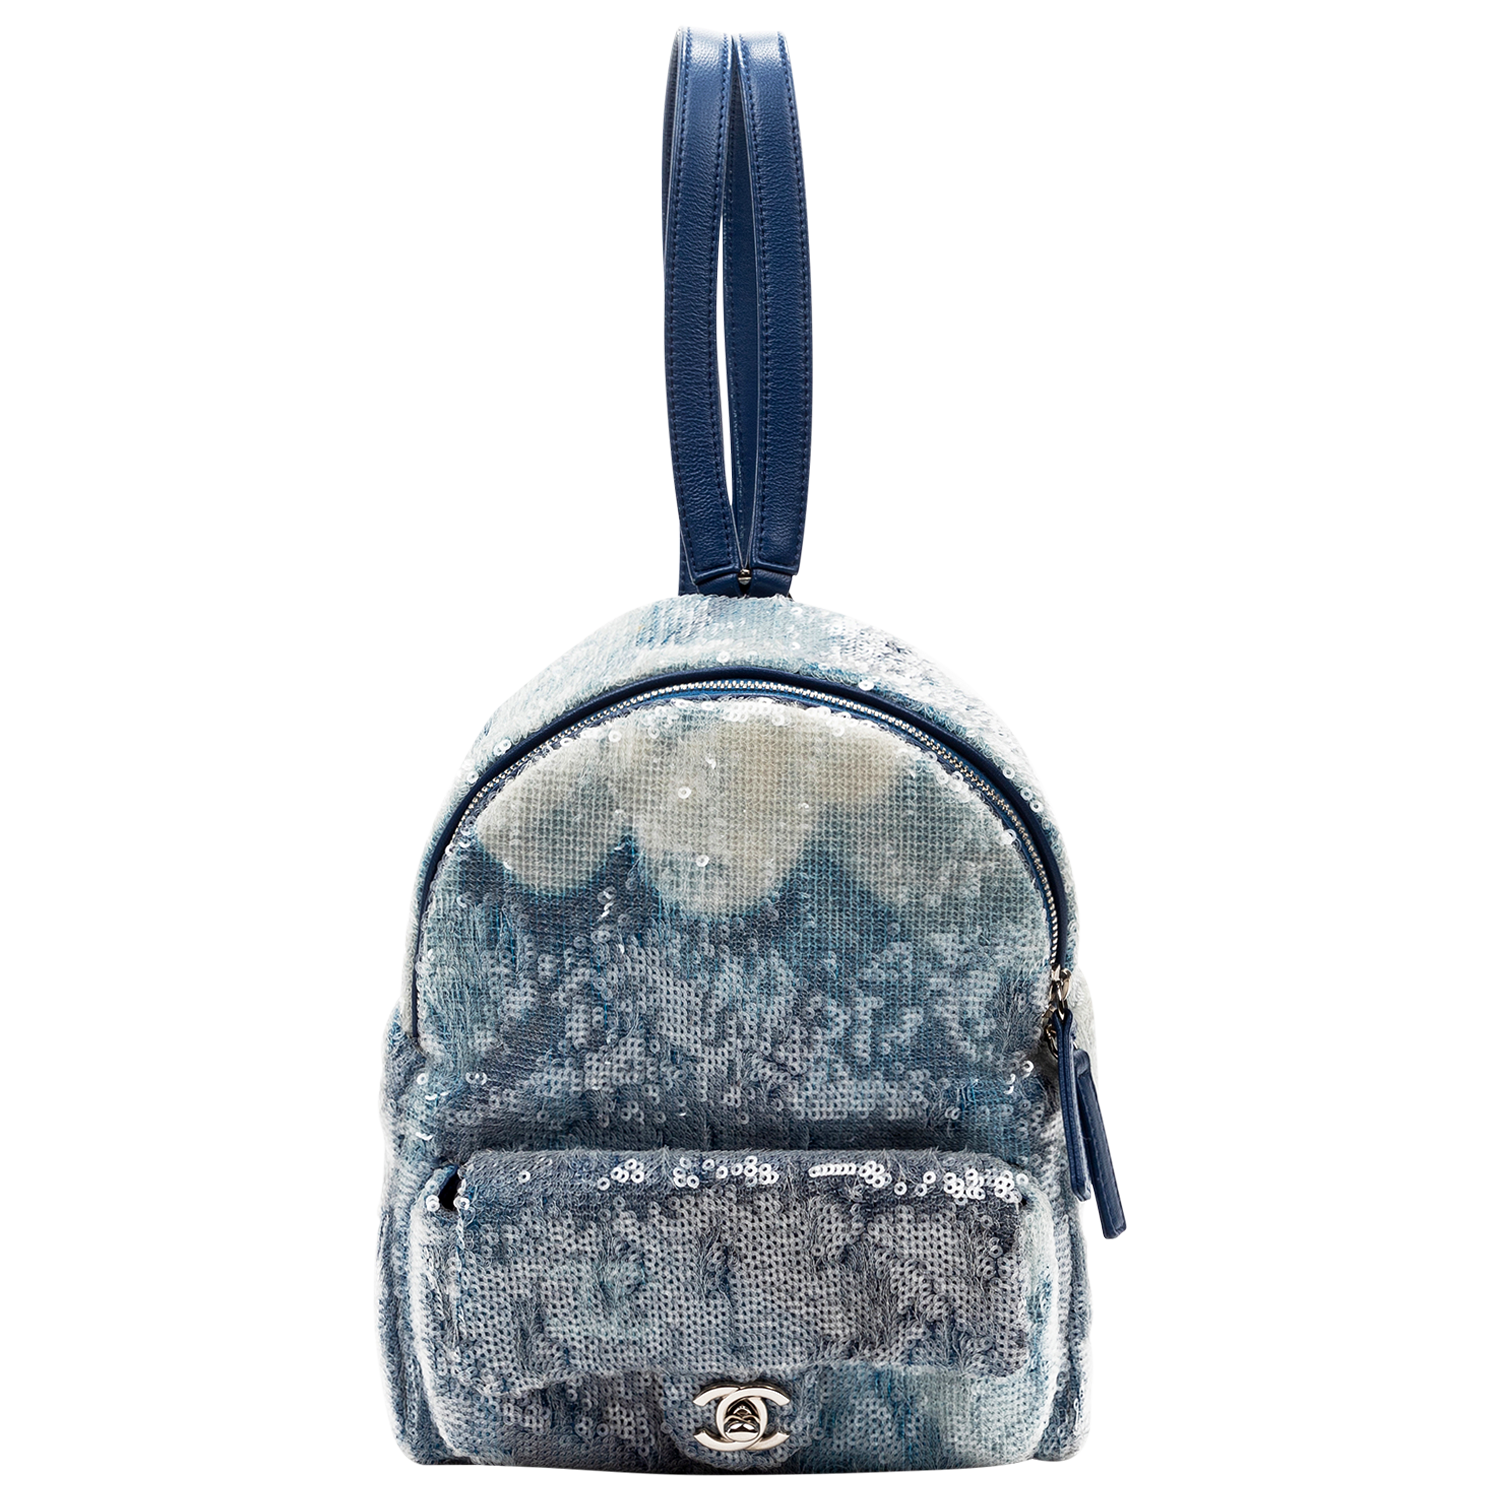 Chanel Spring/Summer 2018 Act II Blue Sequin Coco Cuba Backpack